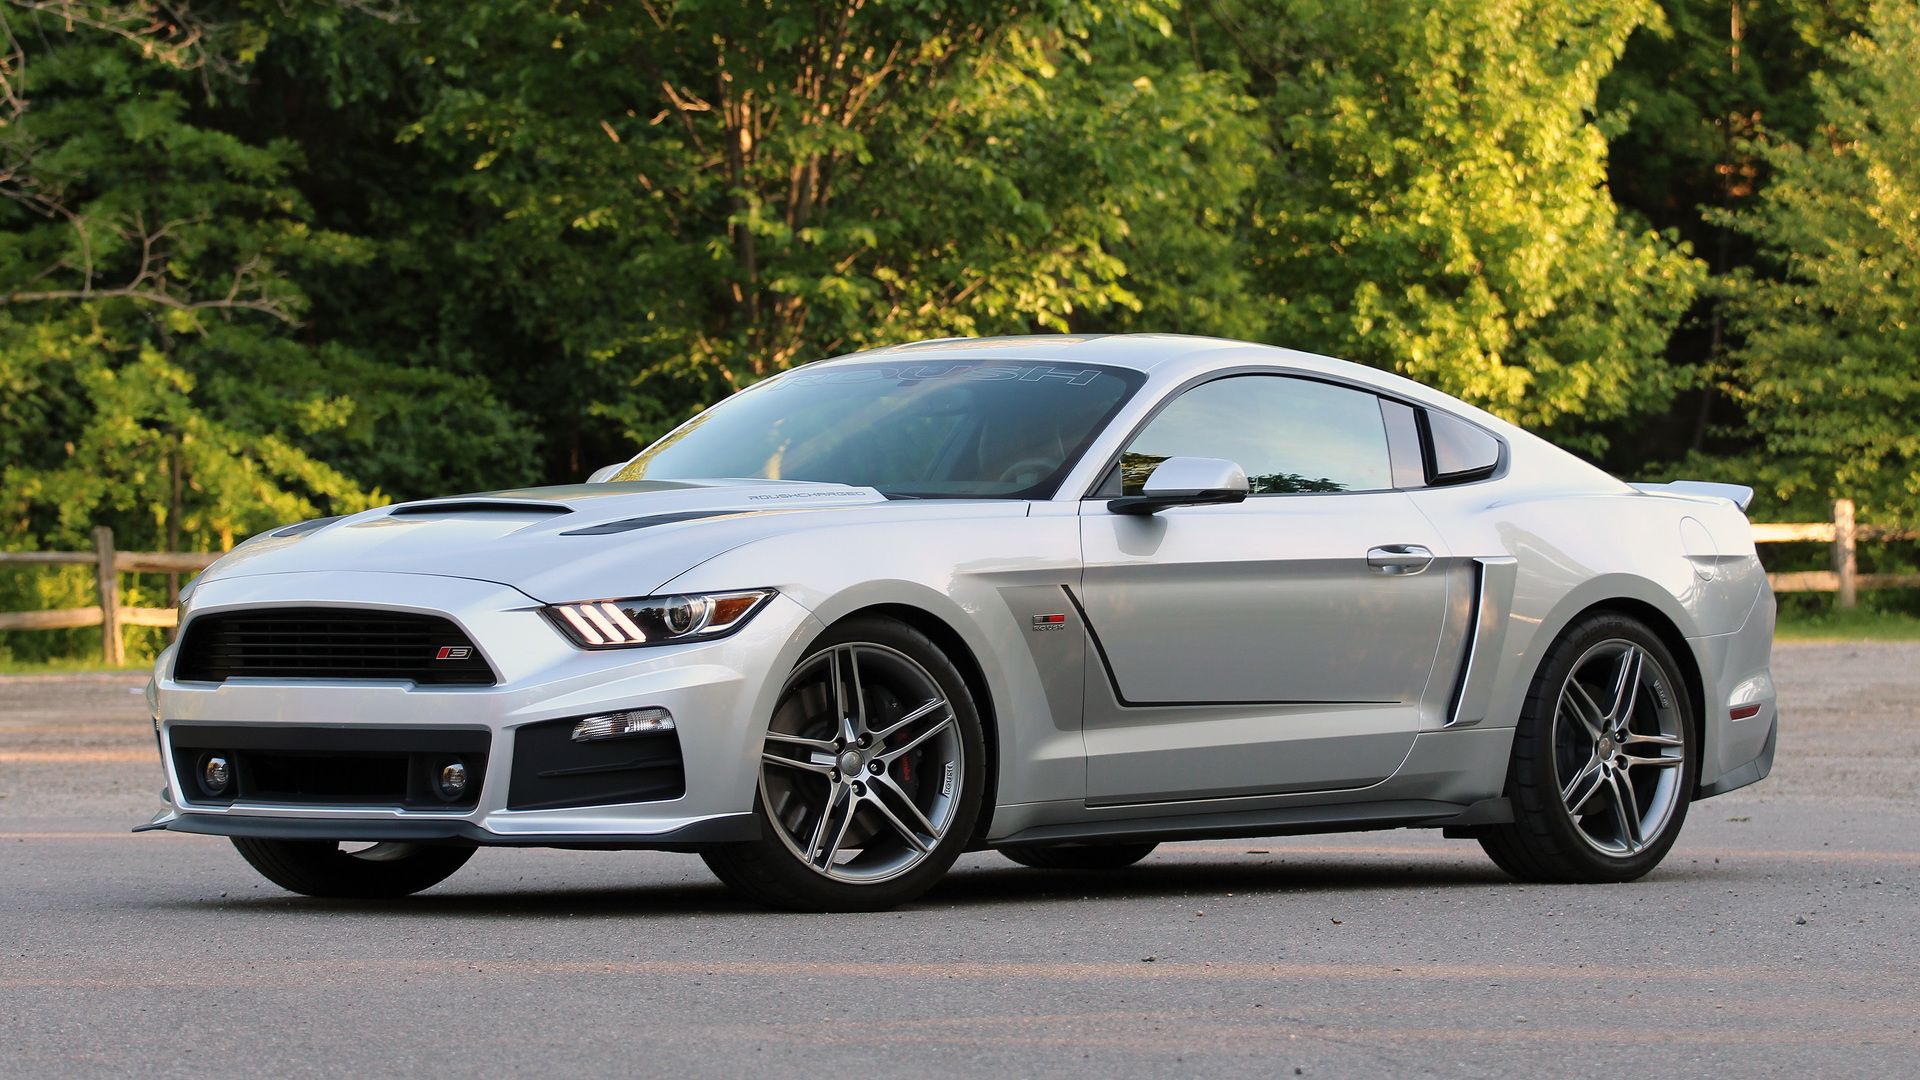 First Drive: 2016 Roush Stage 3 Mustang